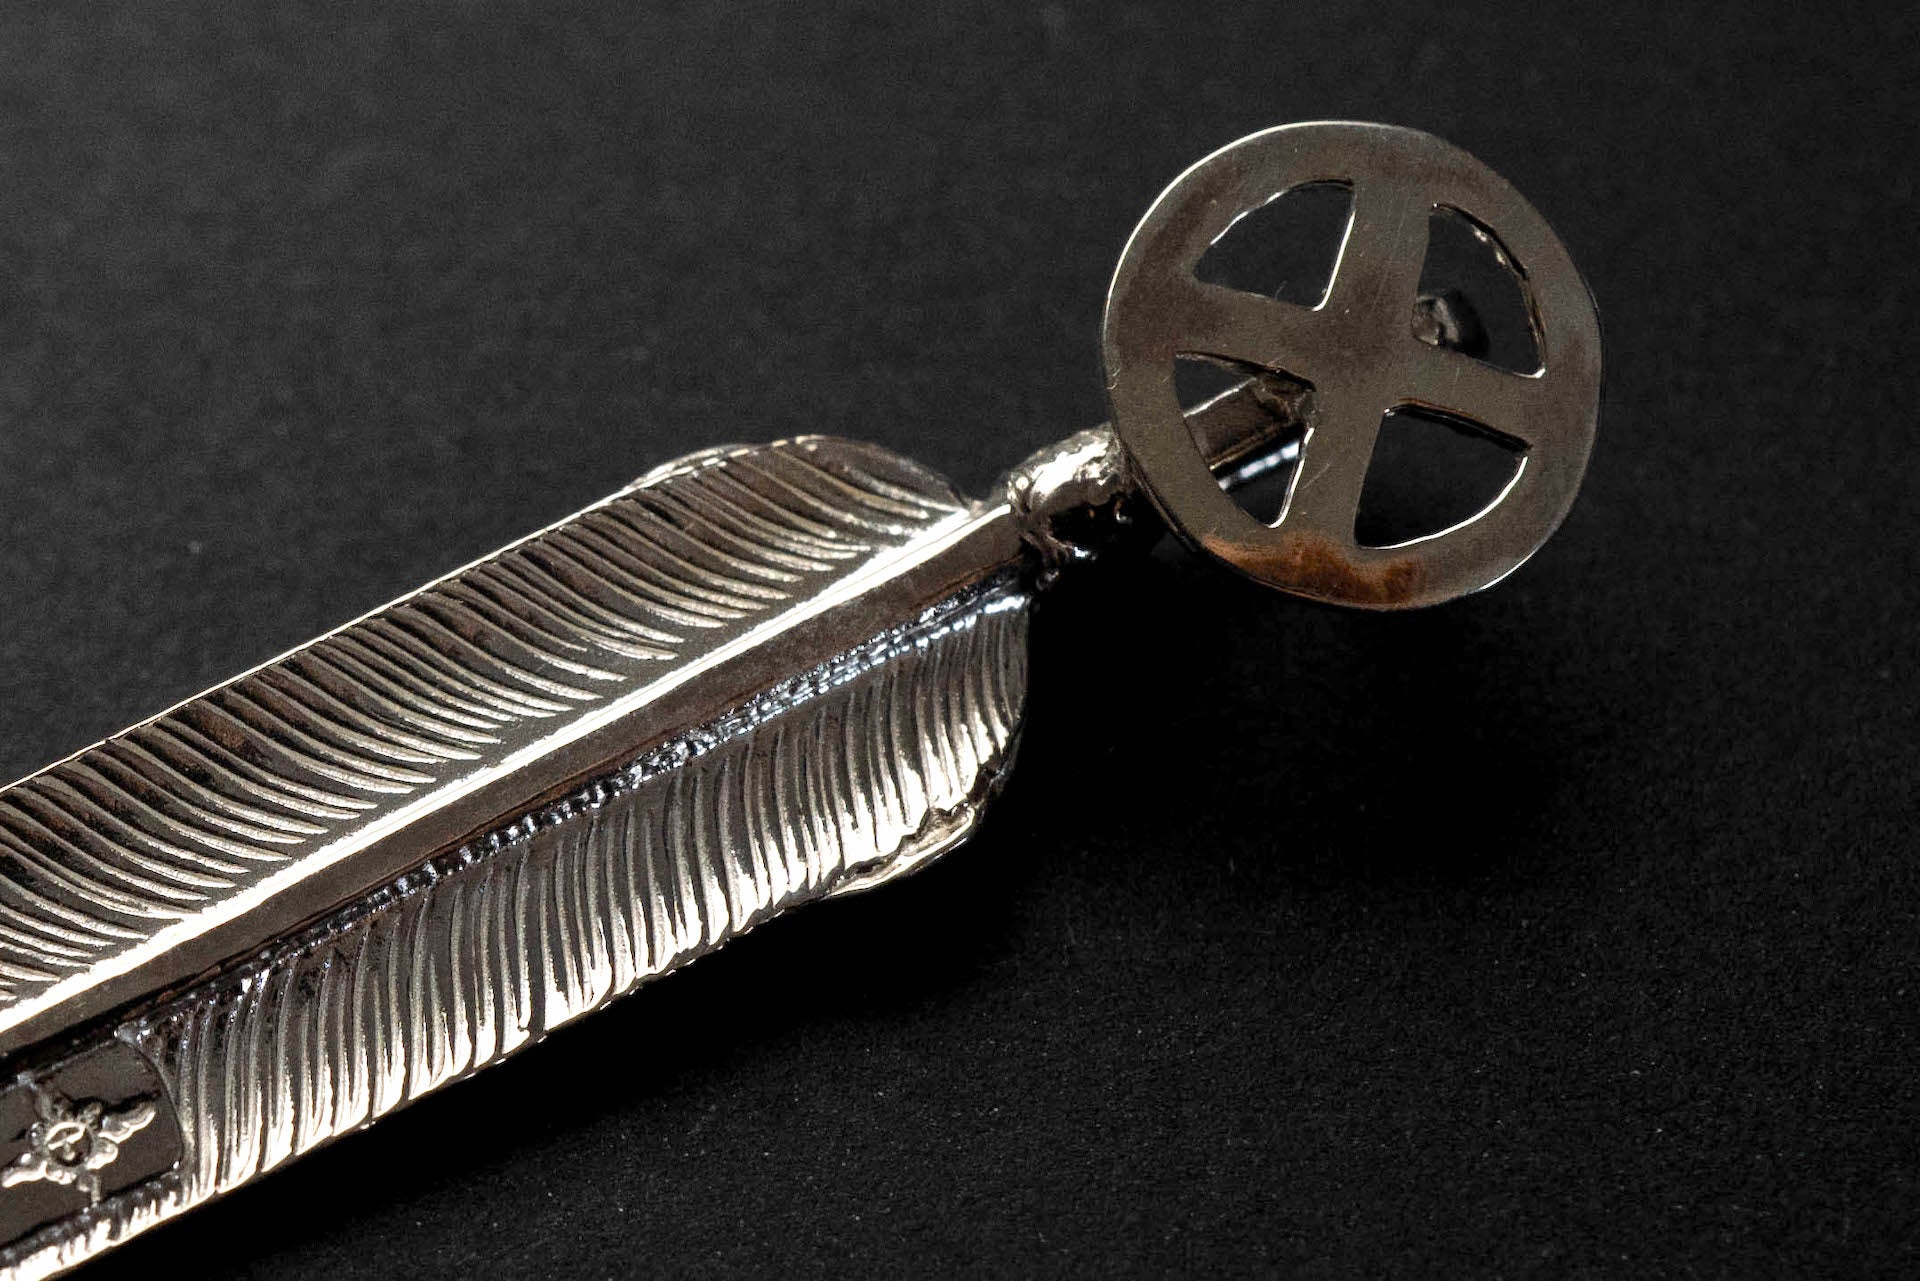 First Arrow's 25th Anniversary "Blessing" Feather Pendant (ANN-25-02)